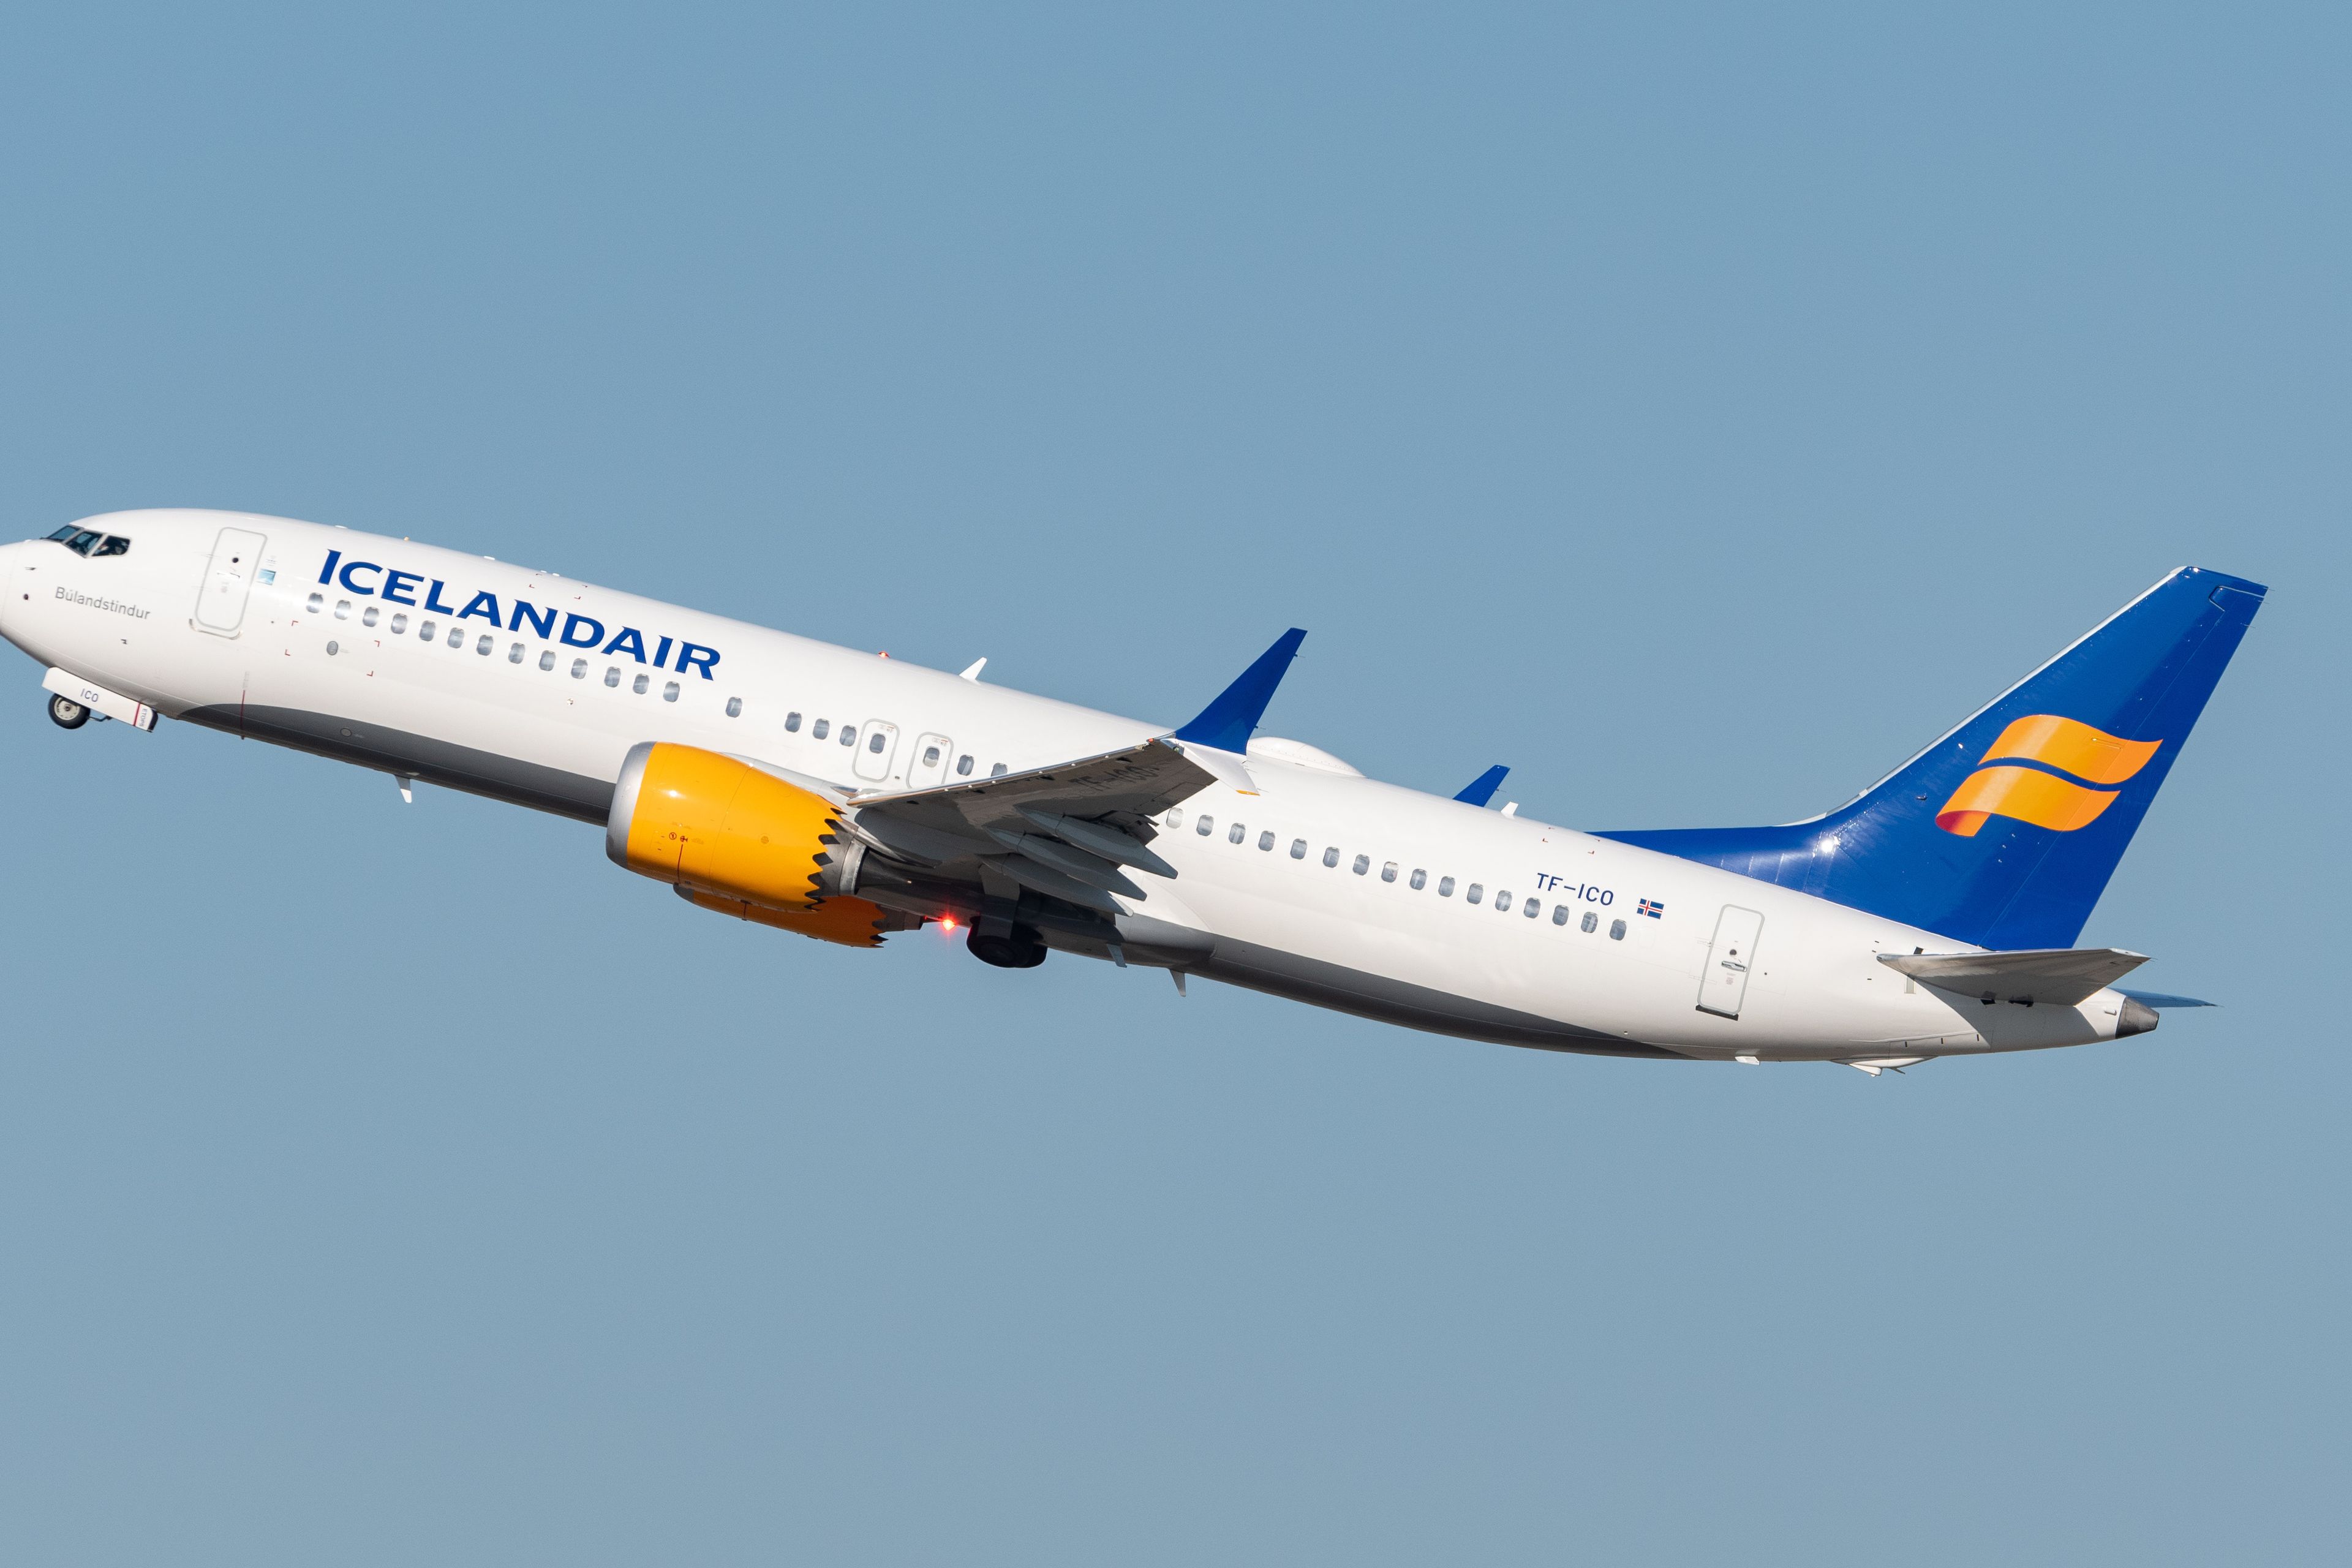 plane of the company "icelandair" in full takeoff, with a blue sky in bottom